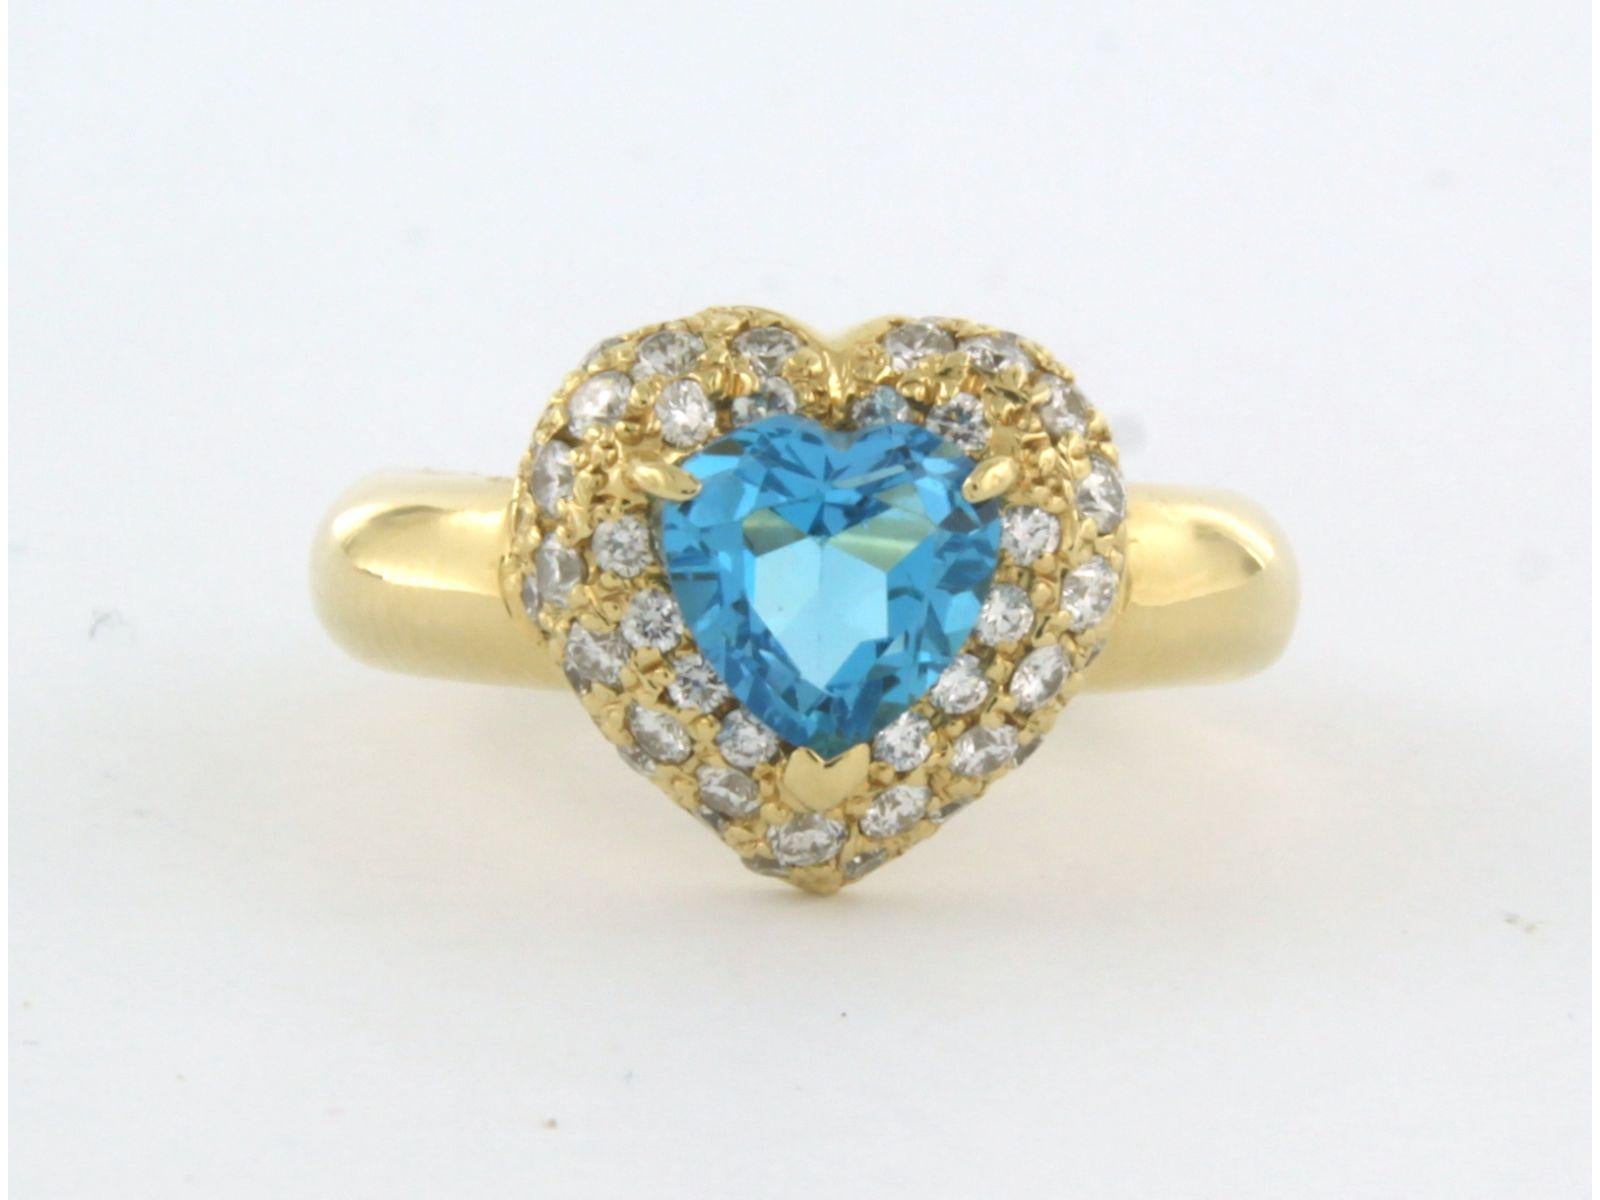 18k yellow gold ring set with blue topaz and brilliant cut diamonds. 0.61ct - F/G - VS/SI - ring size U.S. 5.25 - EU. 16 (50)

detailed description:

the top of the ring is 1.2 cm wide by 6.2 mm wide

weight 8.8 grams

ring size US 5.25 - EU. 16